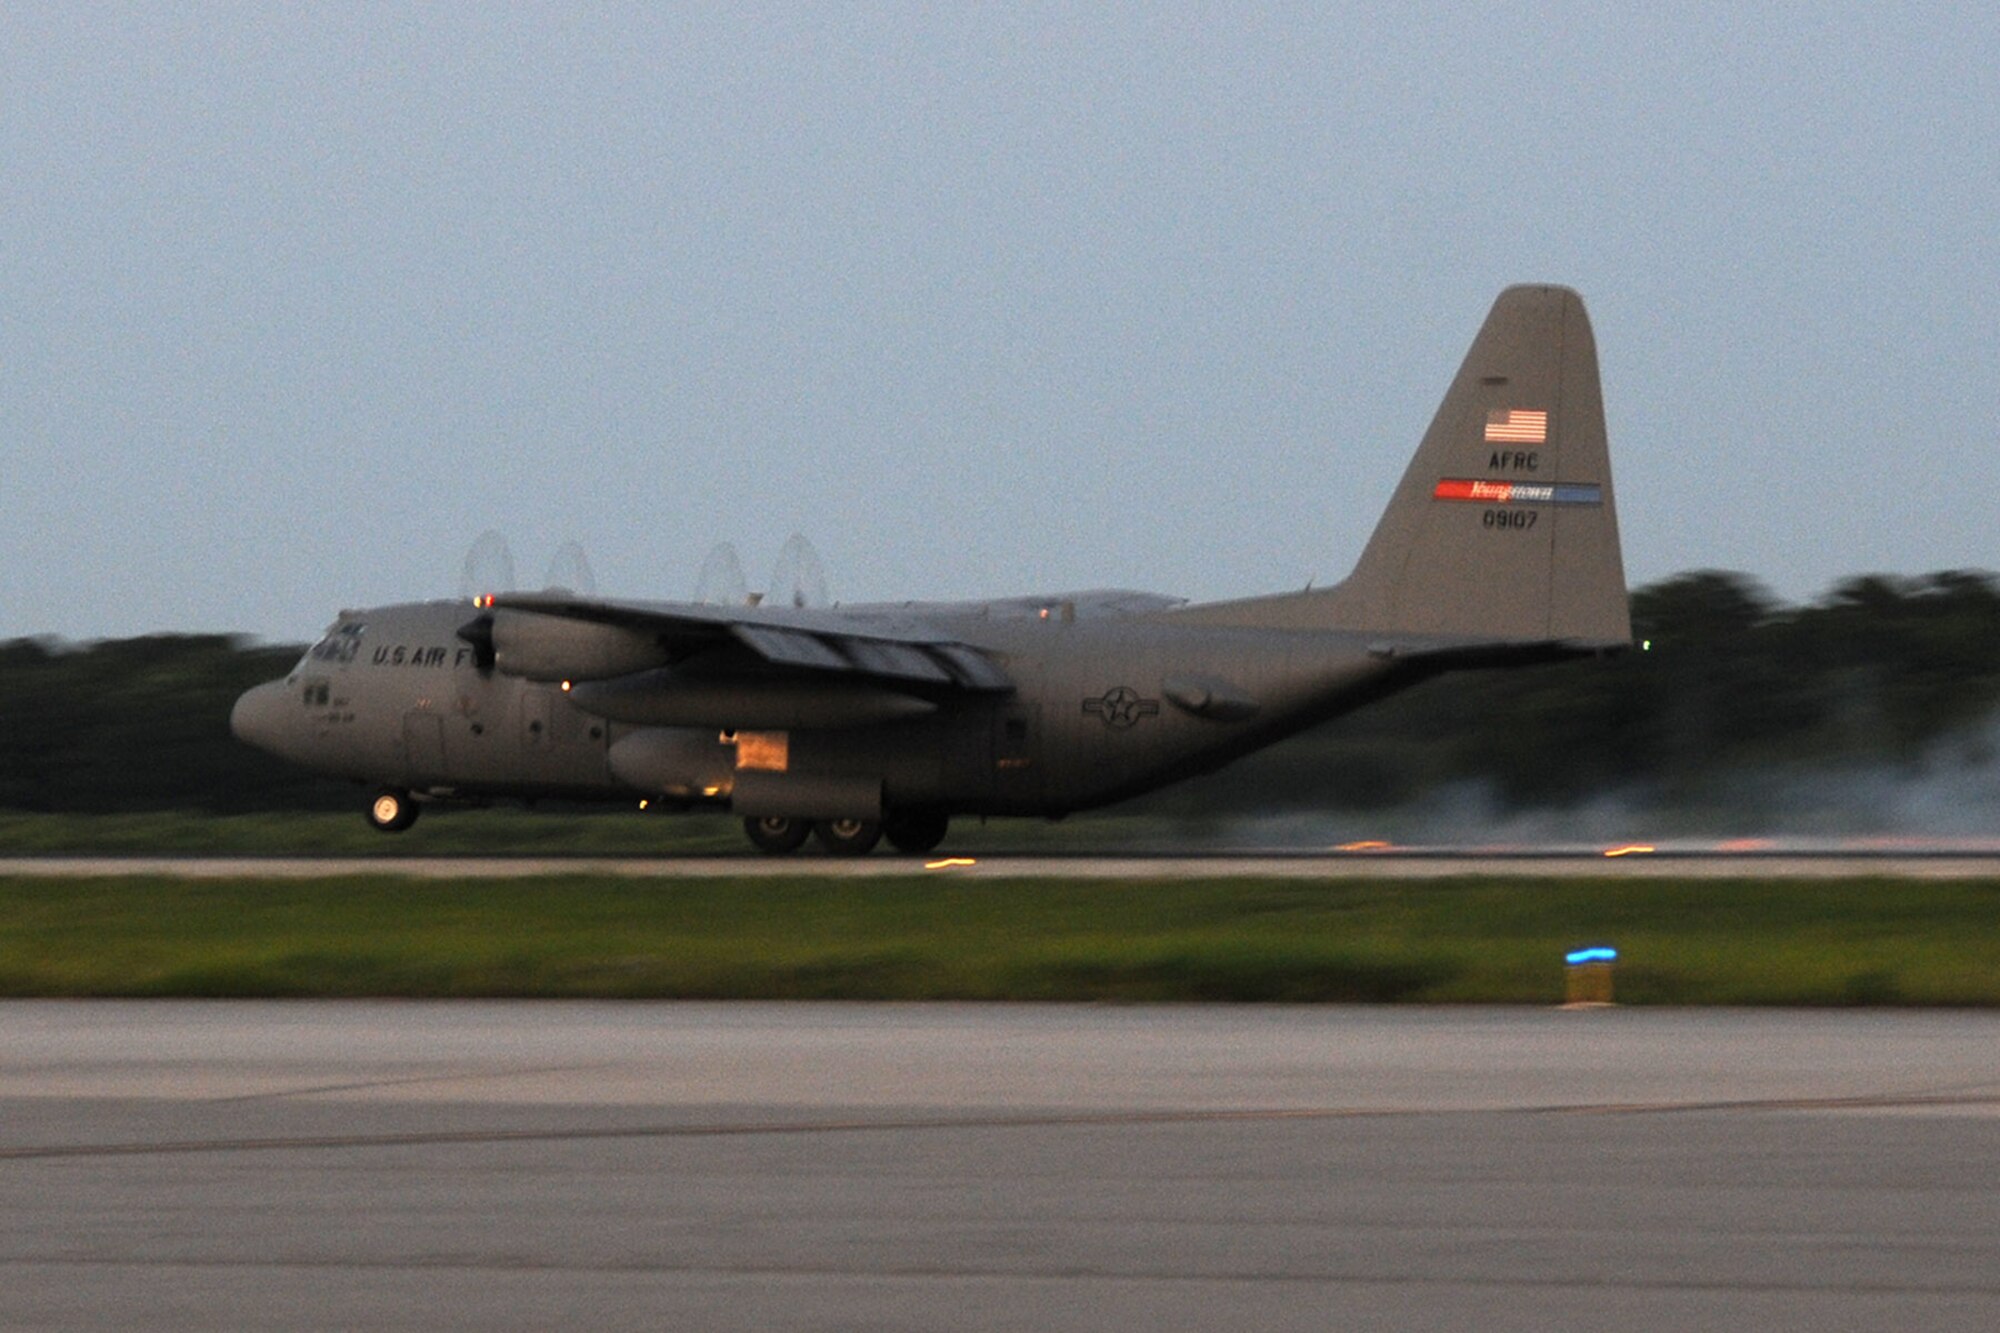 Joint Base Charleston – Air Base, S.C. -- A specially-modified Air Force Reserve C-130 Hercules tactical cargo aircraft, assigned to the 910th Airlift Wing, based at Youngstown Air Reserve Station, Ohio, lands on the runway here, June 15, 2013. The aircraft and crew, part of the 910th’s Aerial Spray Unit, just concluded spray operations at the Joint Base’s Naval Weapons Station to control the population of the disease-carrying pest insects at the installation. The 910th’s 757th Airlift Squadron is home to the Department of Defense’s only large-area, fixed-wing aerial spray capability. U.S. Air Force photo by Tech. Sgt. Rick Lisum.